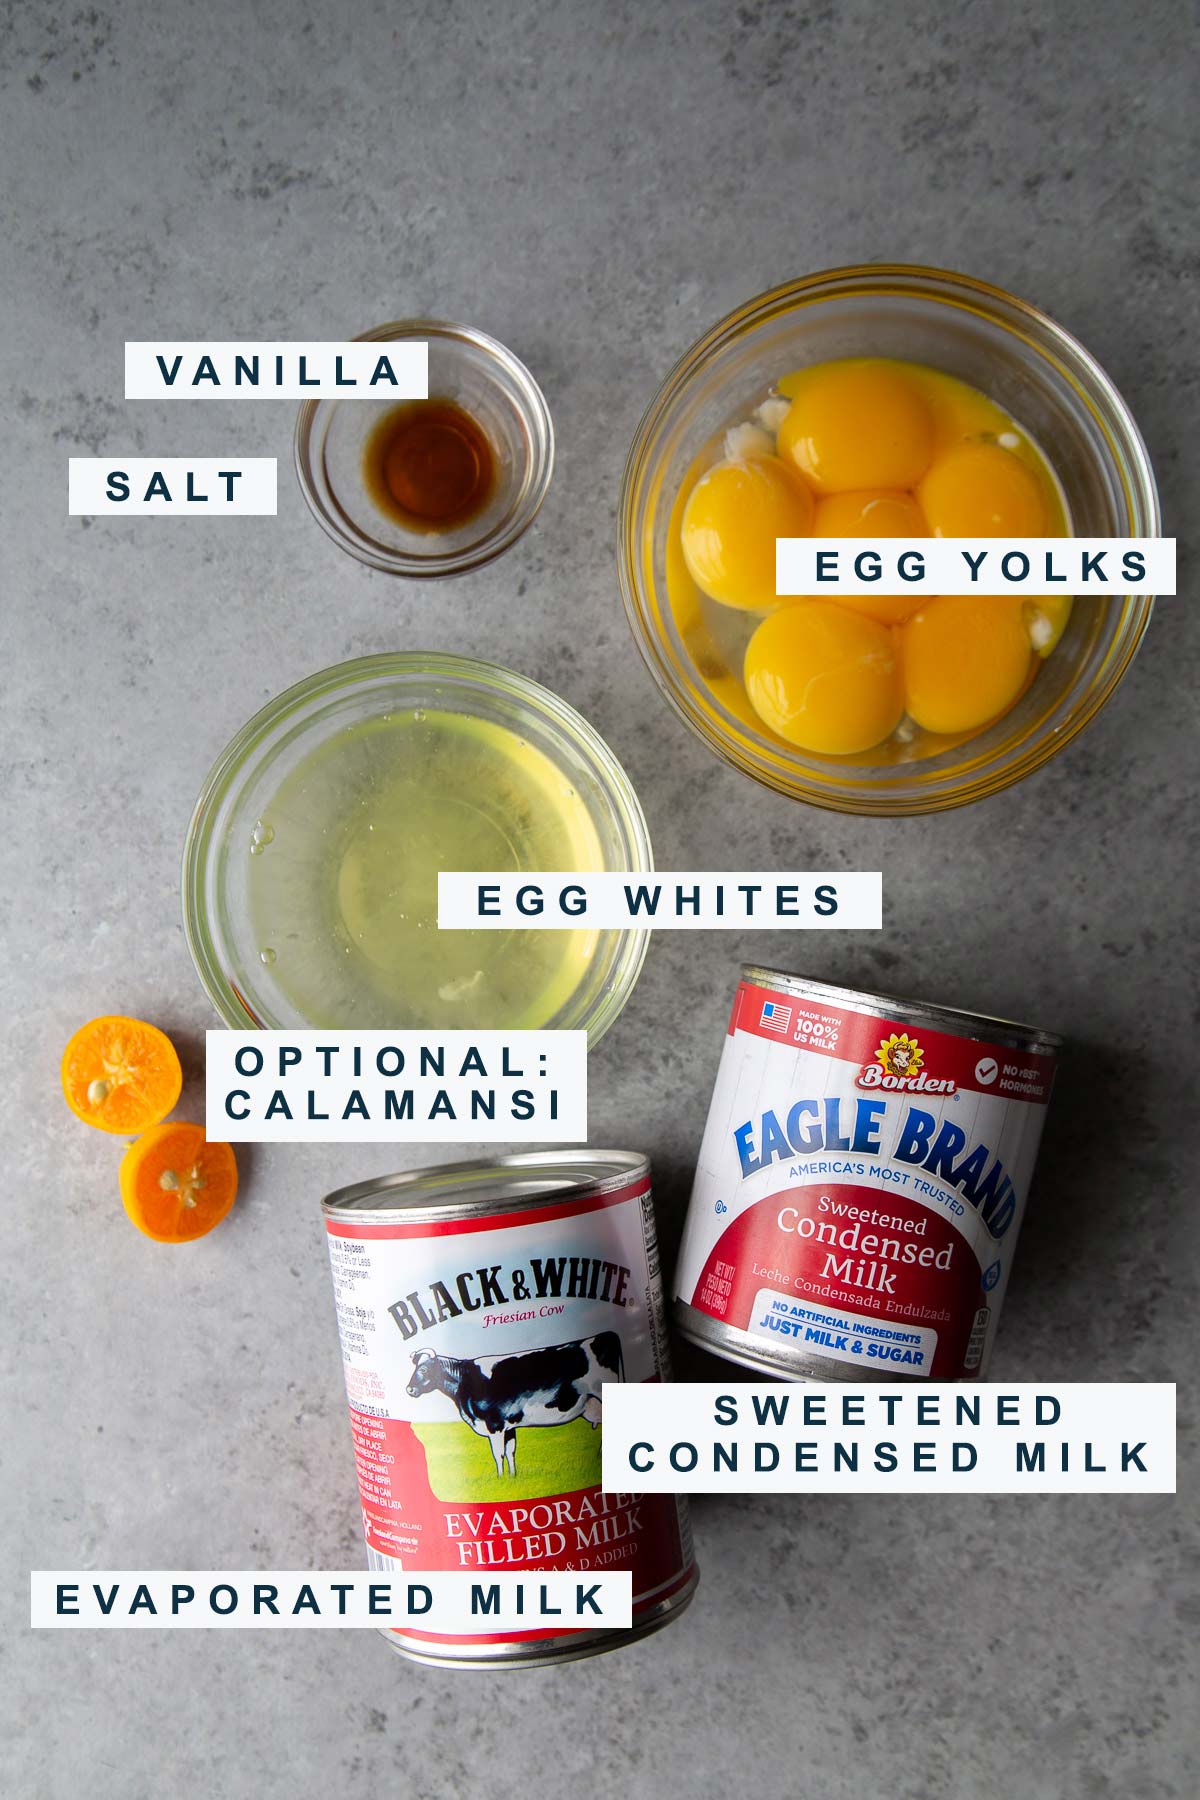 ingredients needed to make Filipino egg pie include evaporated milk, sweetened condensed milk, and egg yolks.